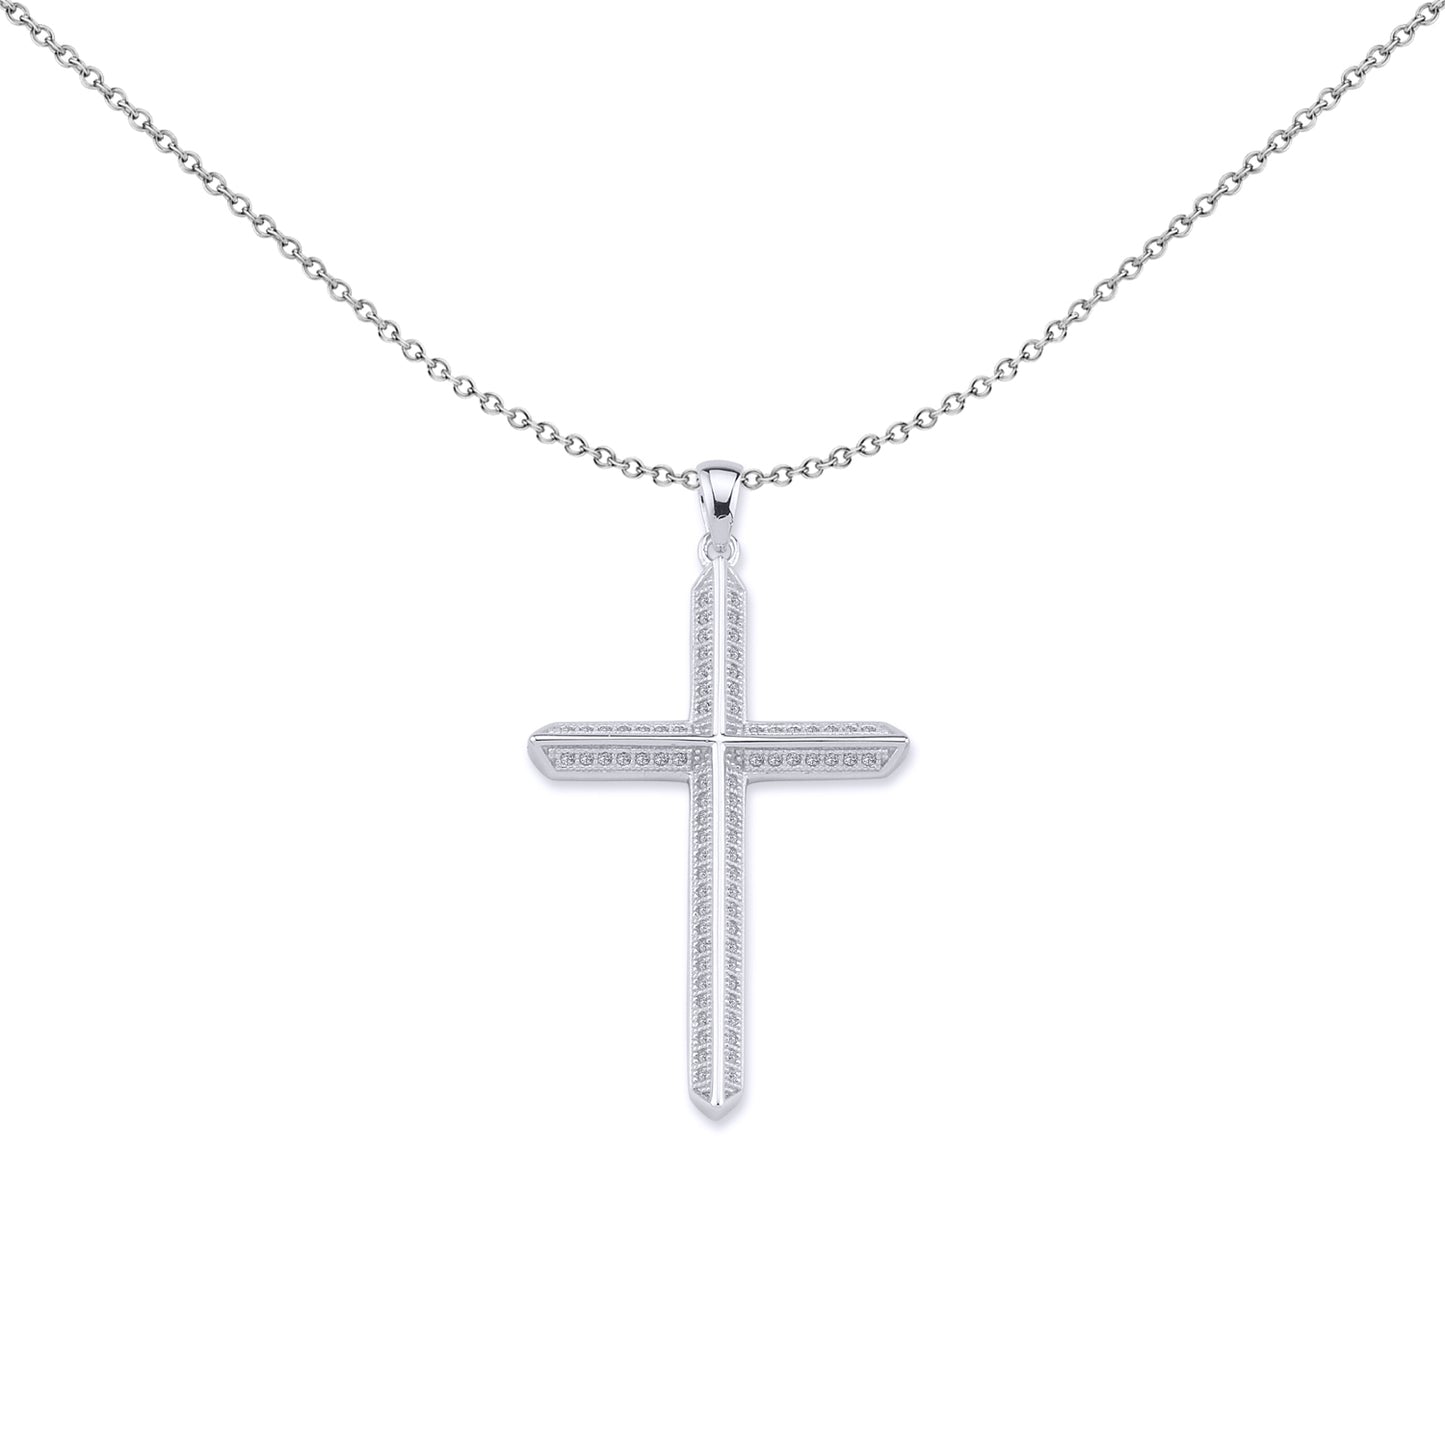 Unisex Silver  CZ Prism Angled Cross Pendant Necklace 18 inch - GVX041